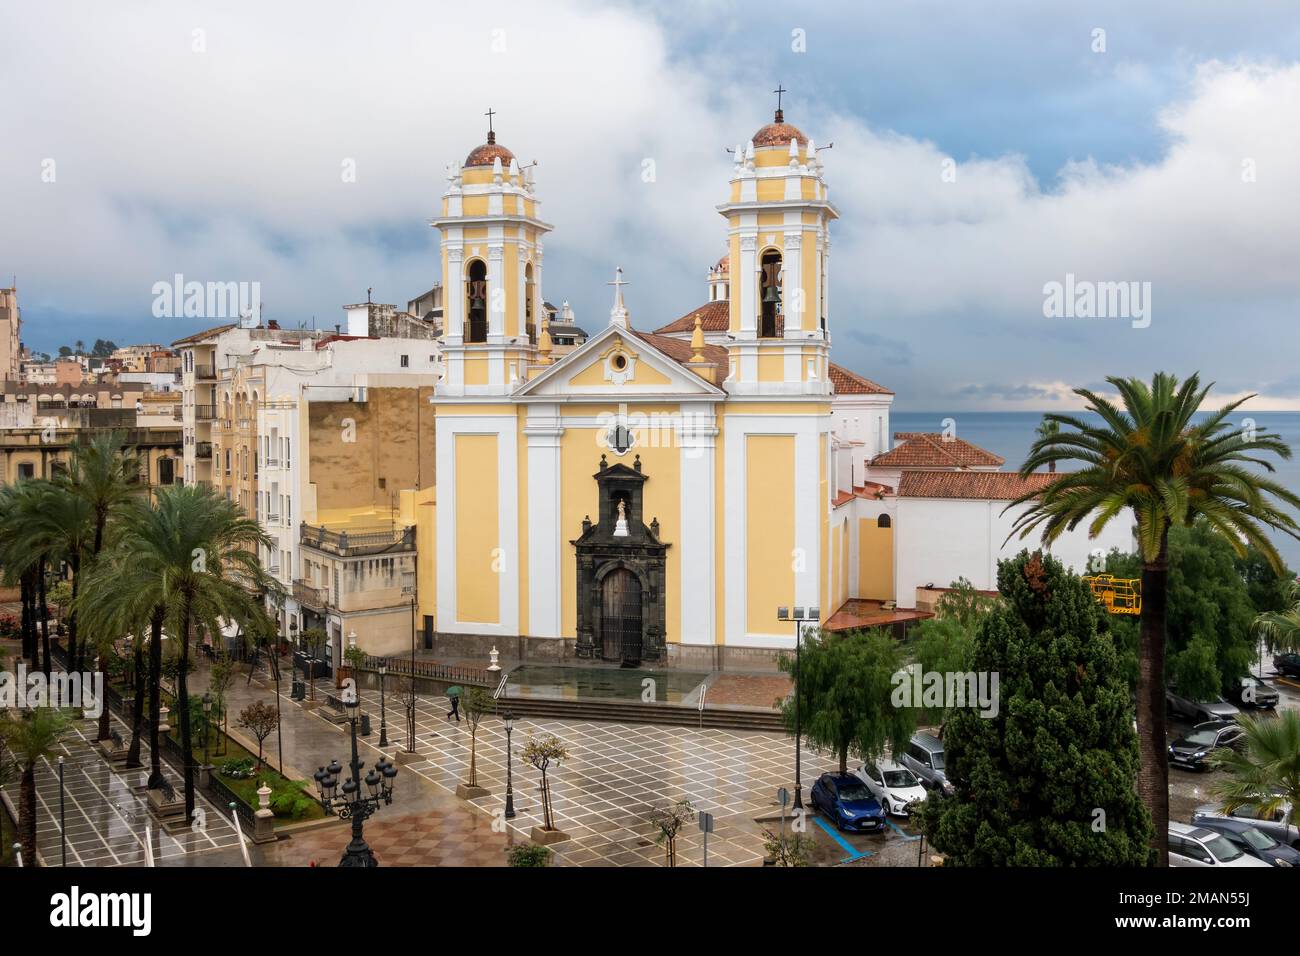 Ceuta, Spain - December 04, 2022: View of the Cathedral of Ceuta, Spain Stock Photo